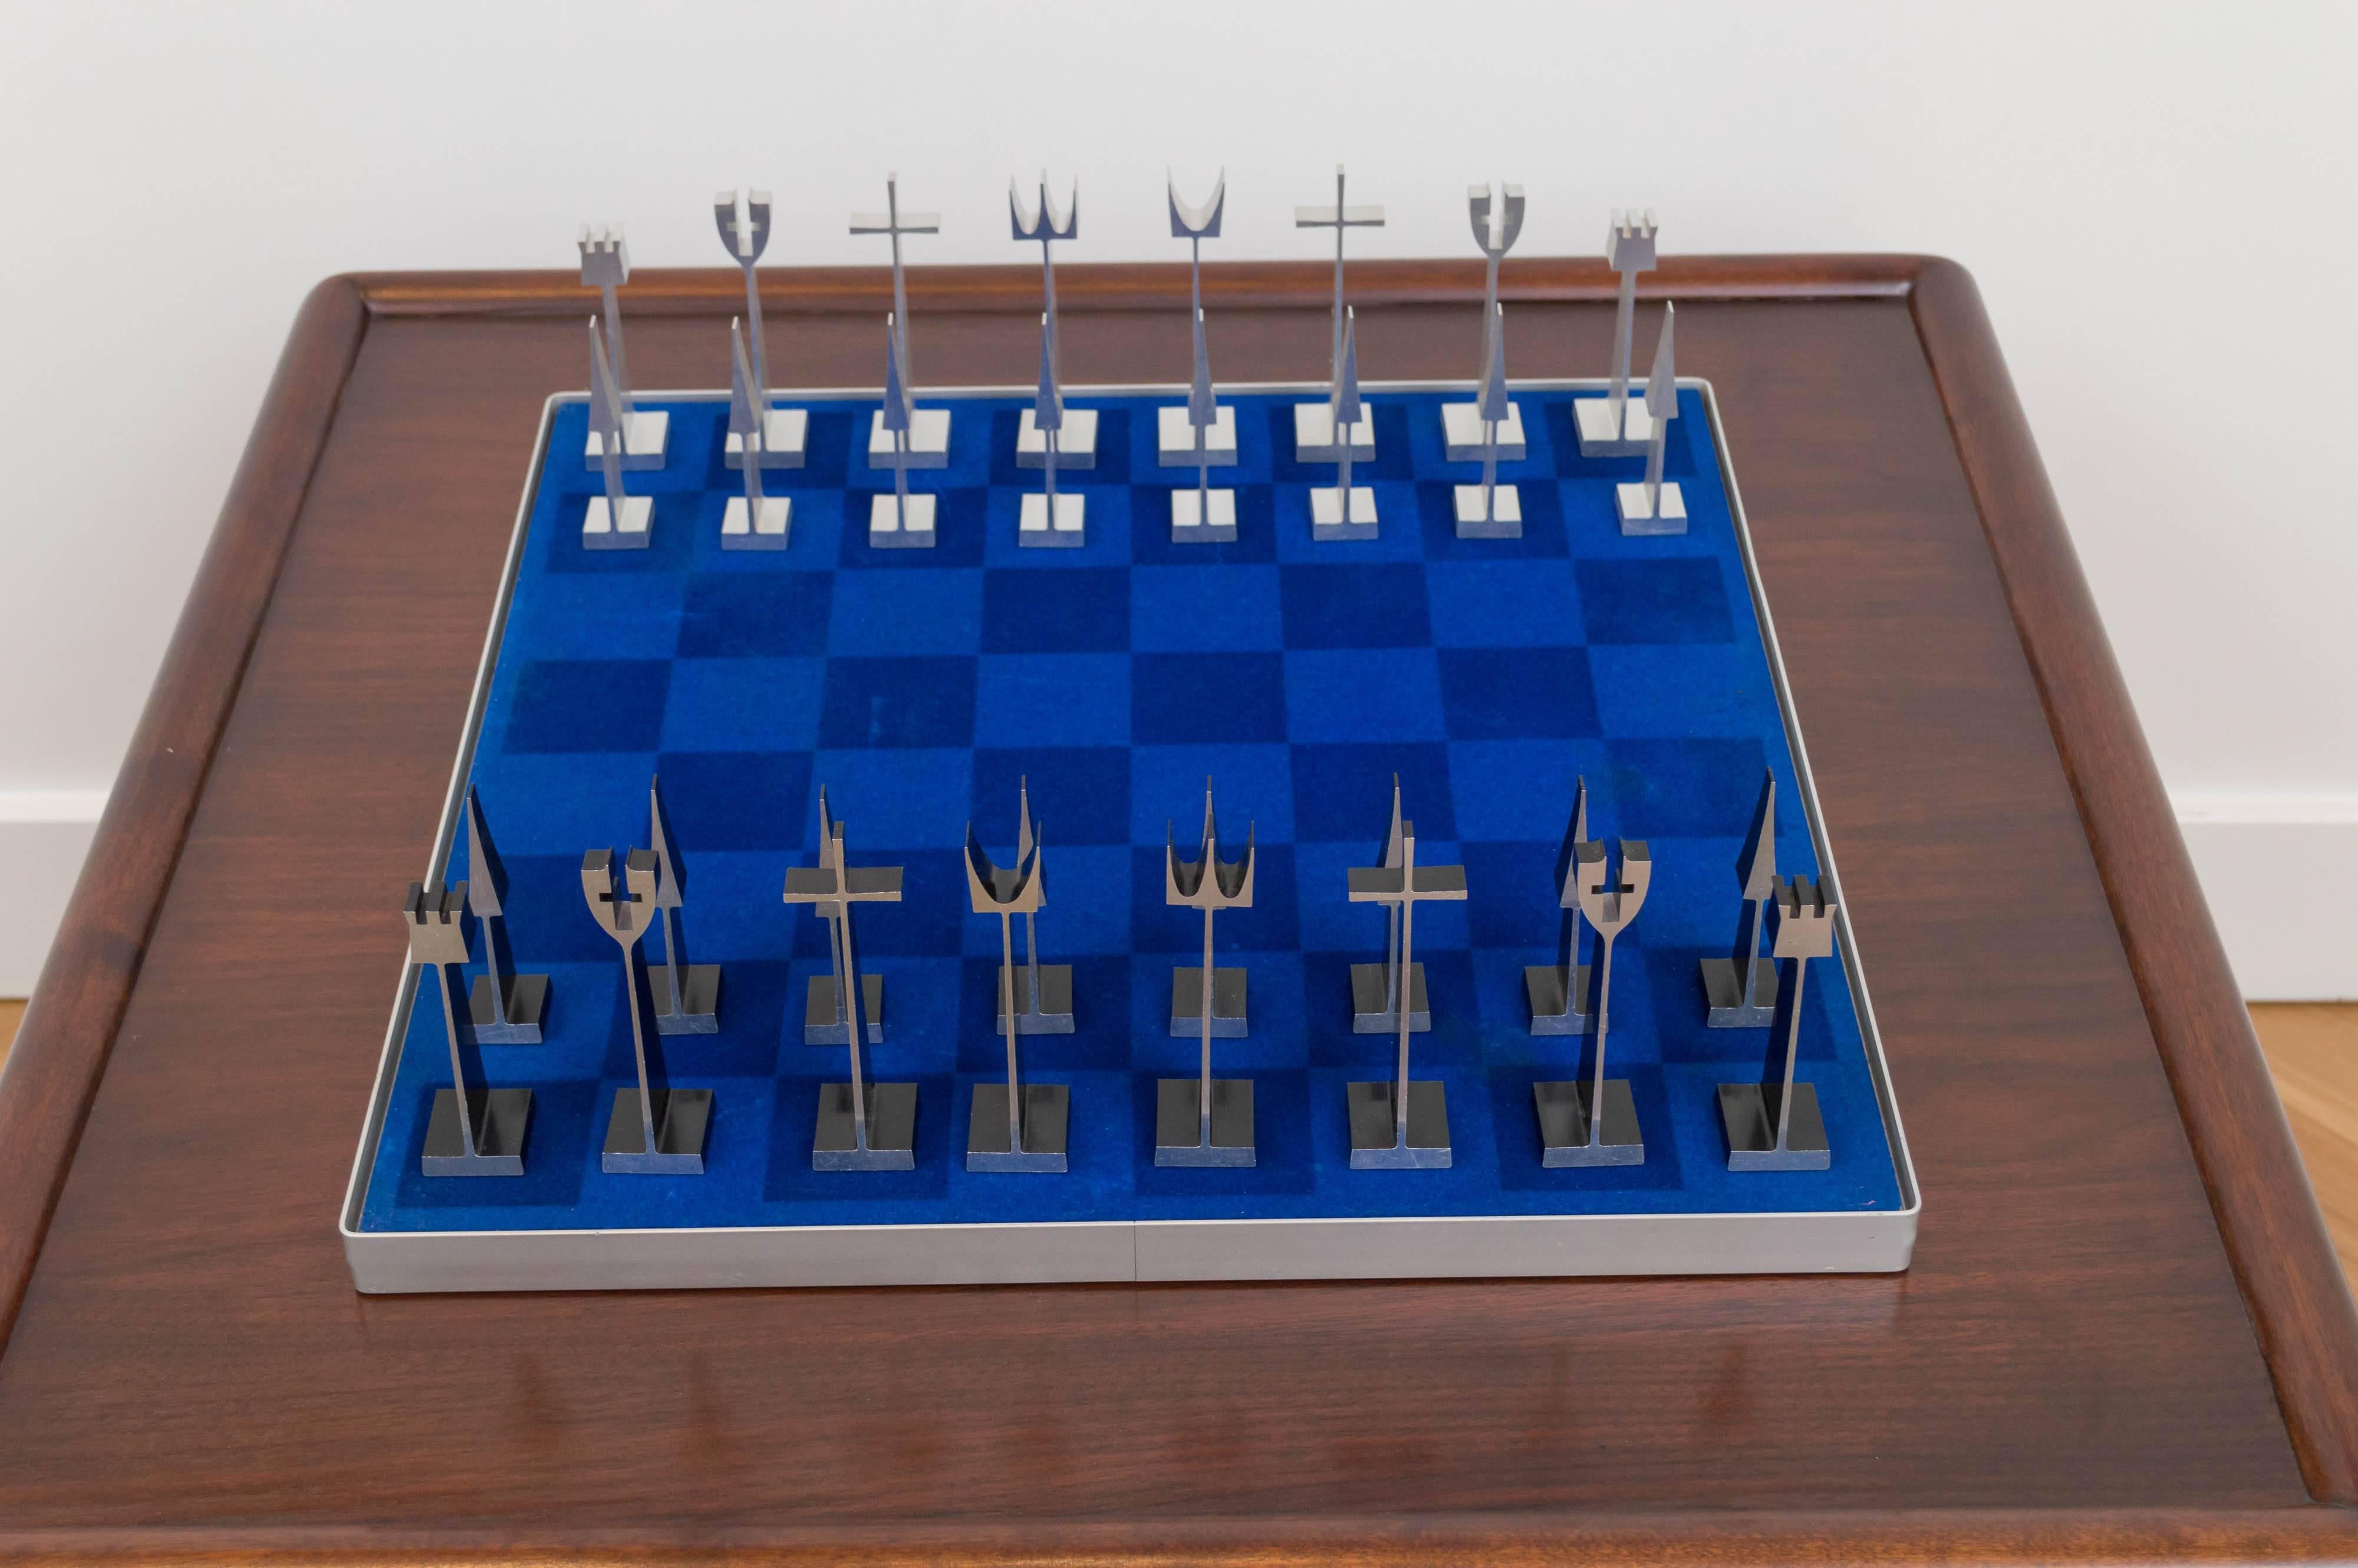 Austin COX chess set with a board.
Note the board has some staining.